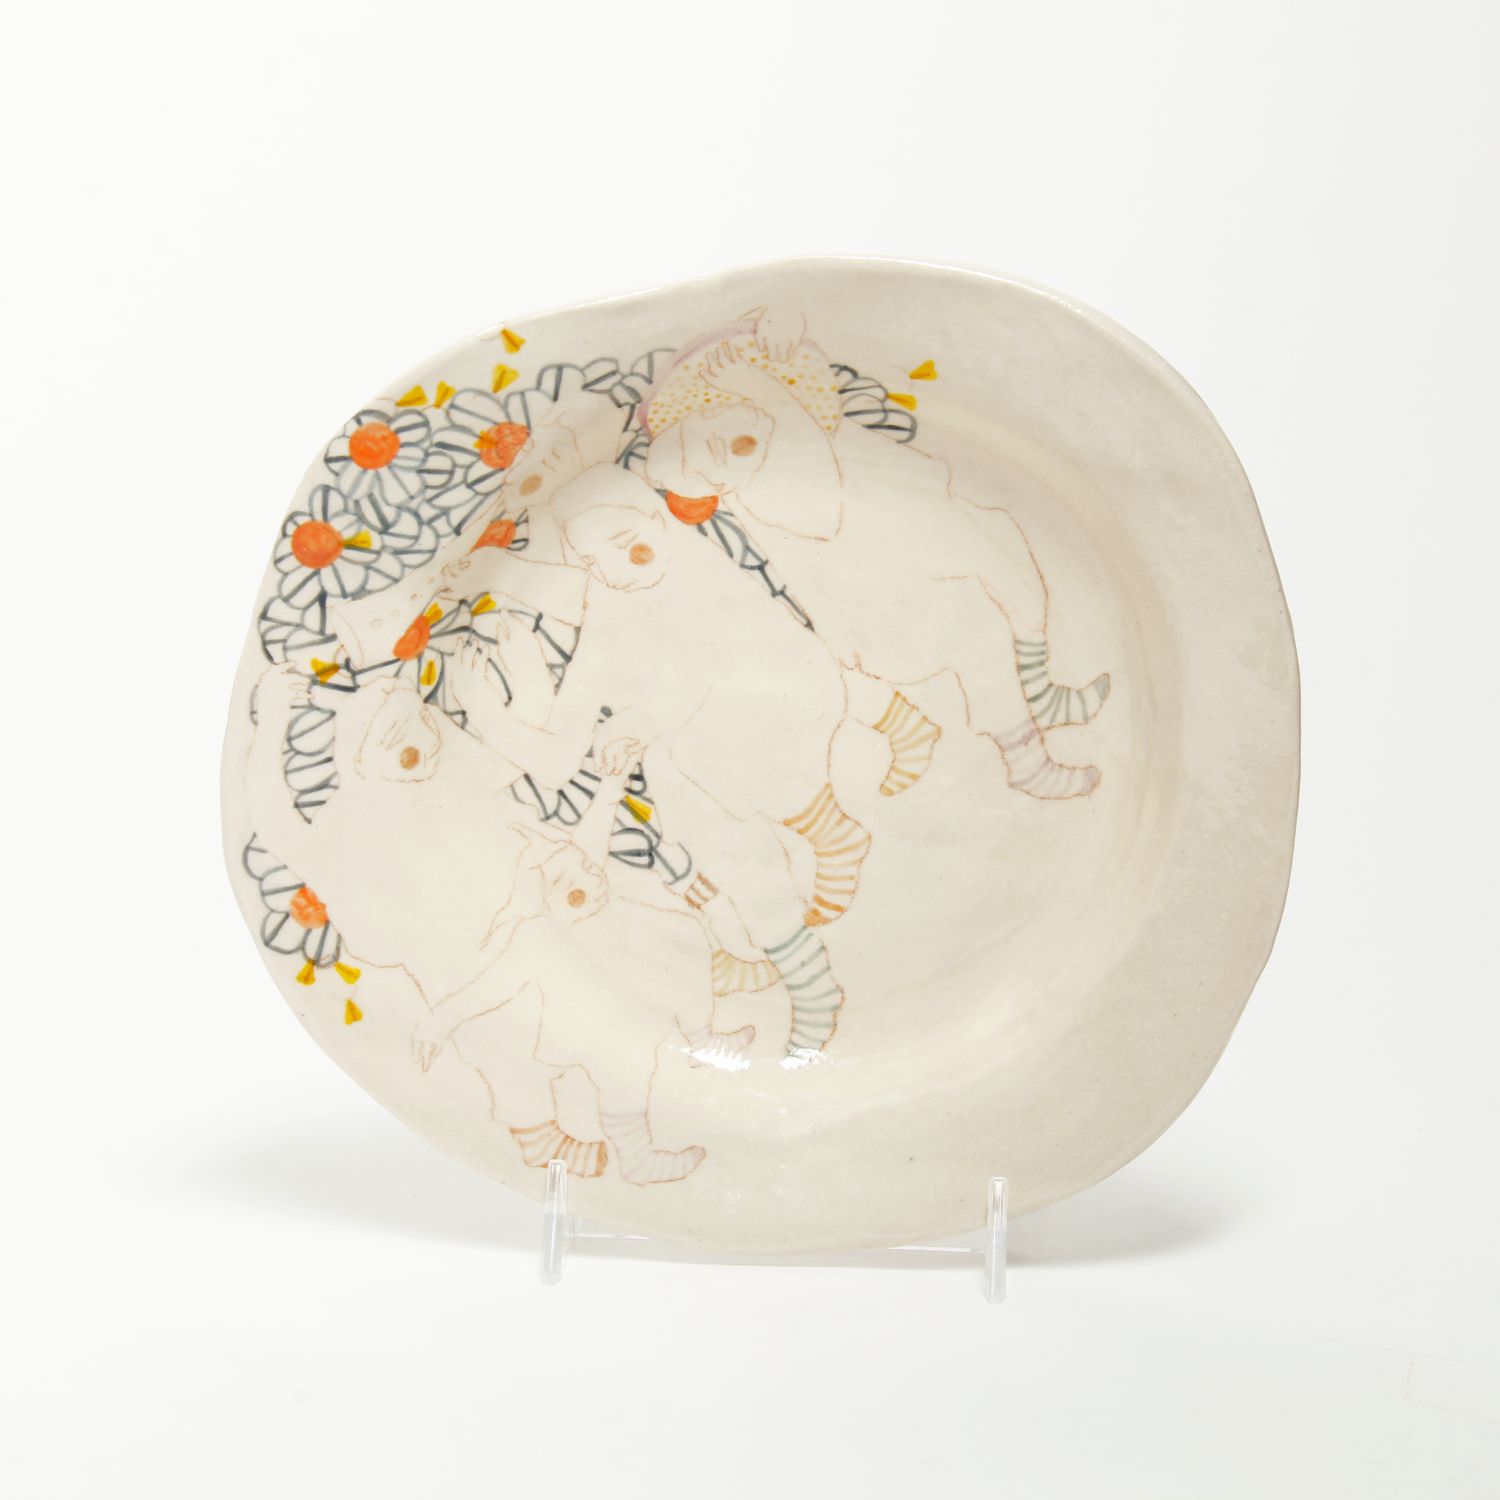 Japneet Kaur: Plate In Celebration of New Moon Product Image 1 of 3